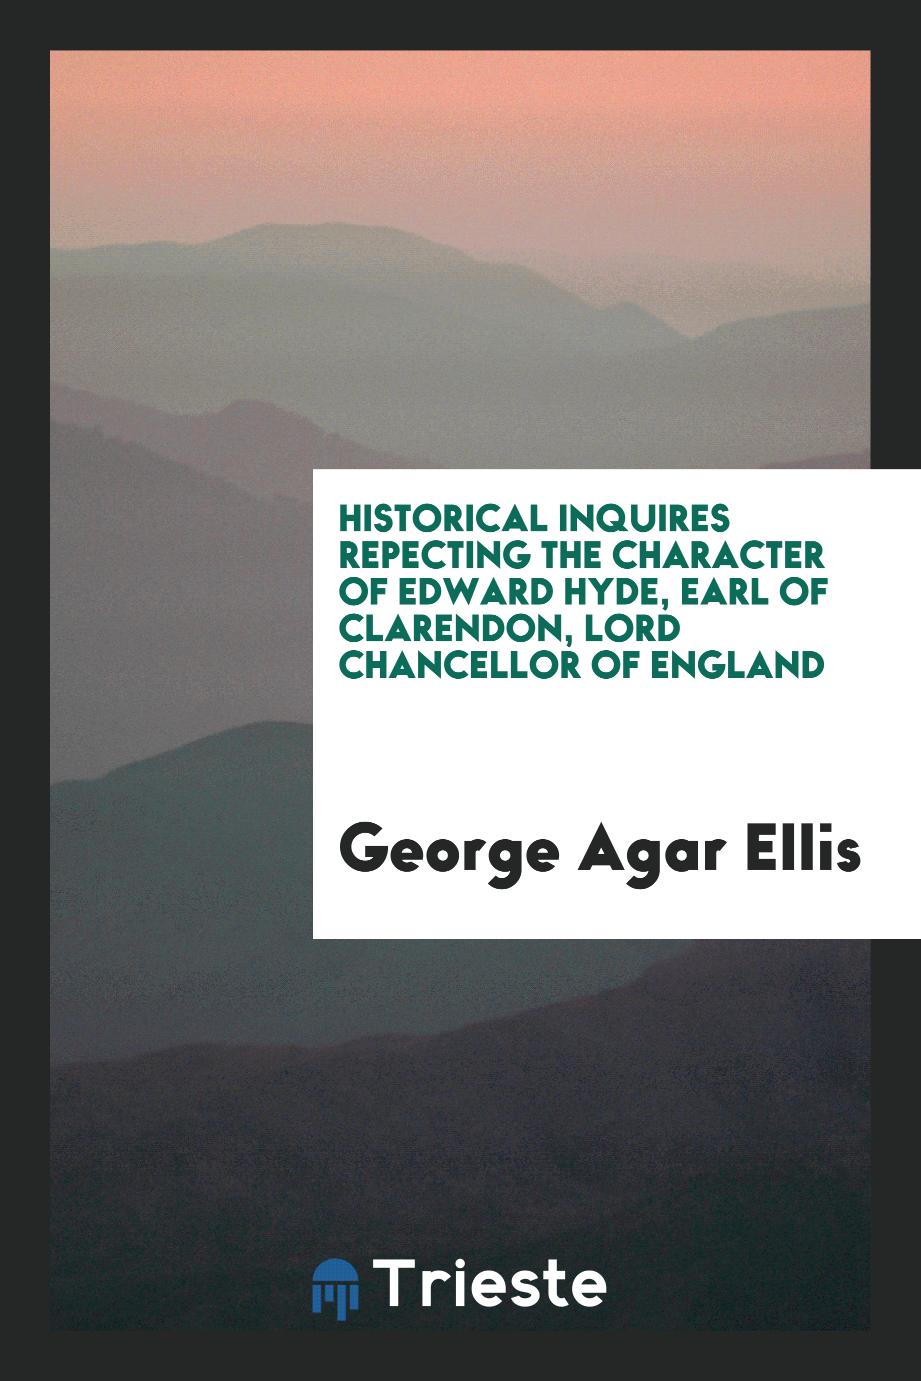 Historical inquires repecting the character of Edward Hyde, earl of Clarendon, lord chancellor of England